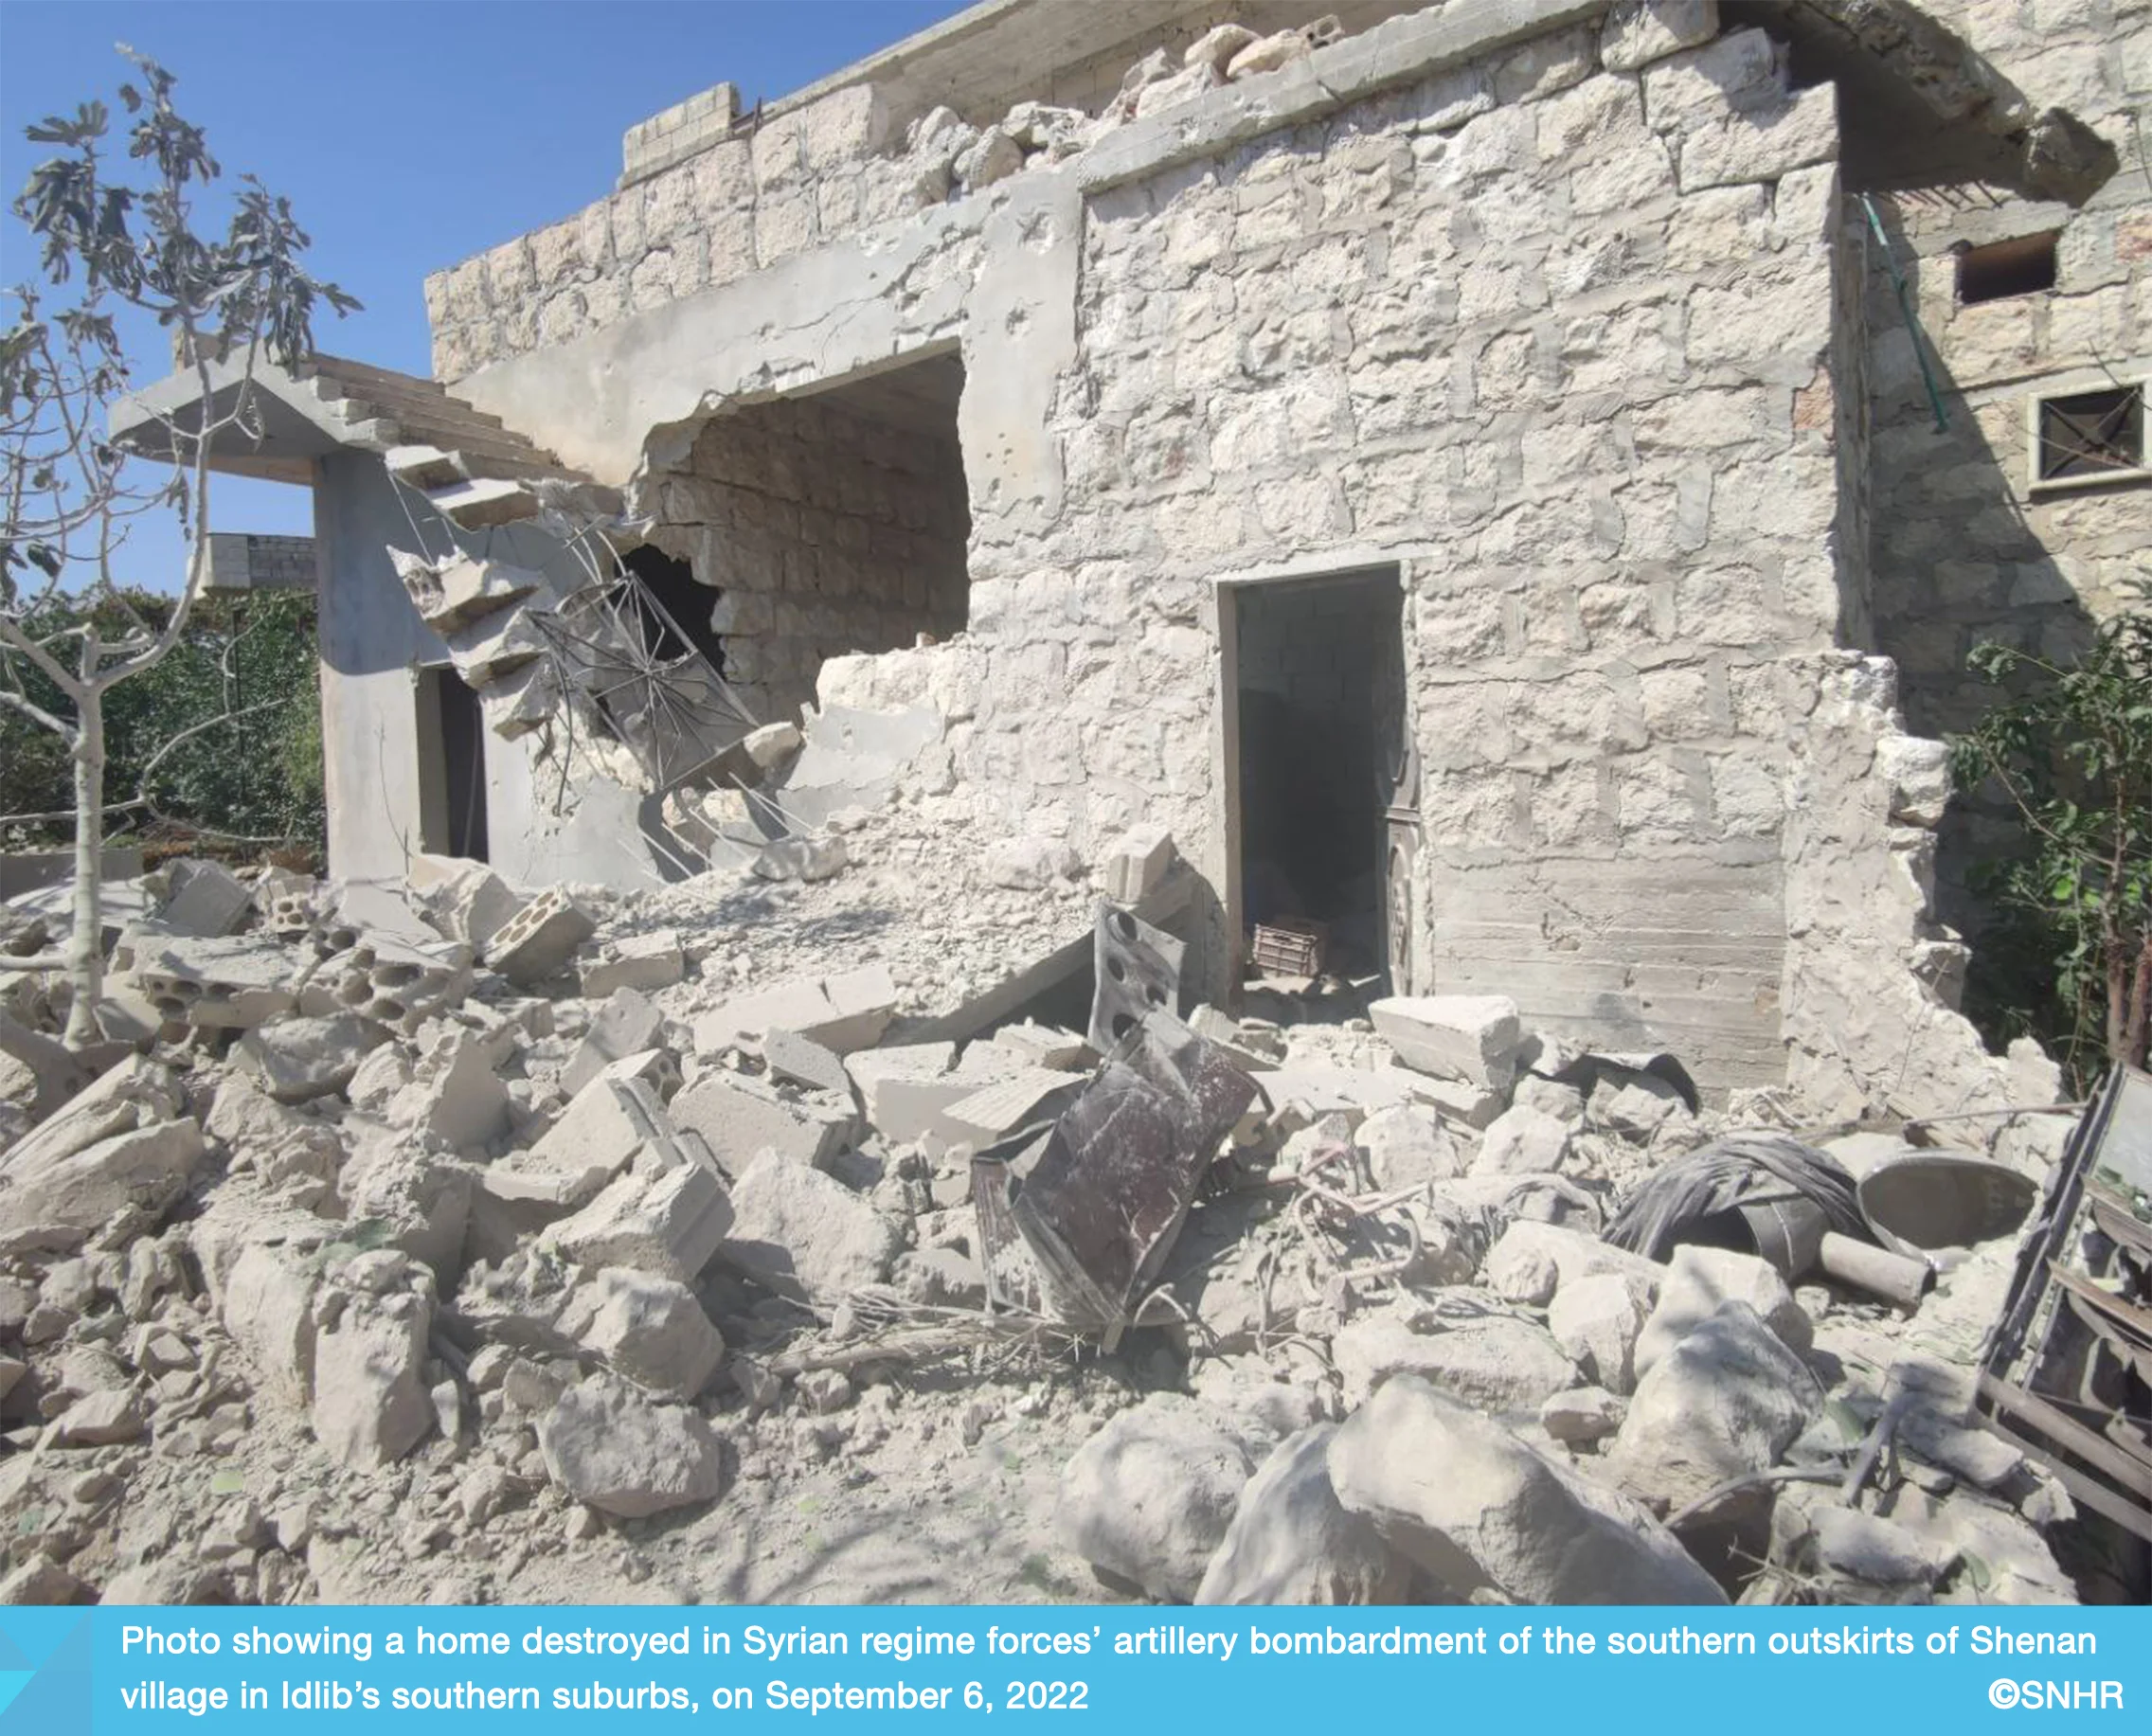 A woman was wounded and a mosque damaged in Syrian regime forces’ bombing on southern Idlib on Sep 6